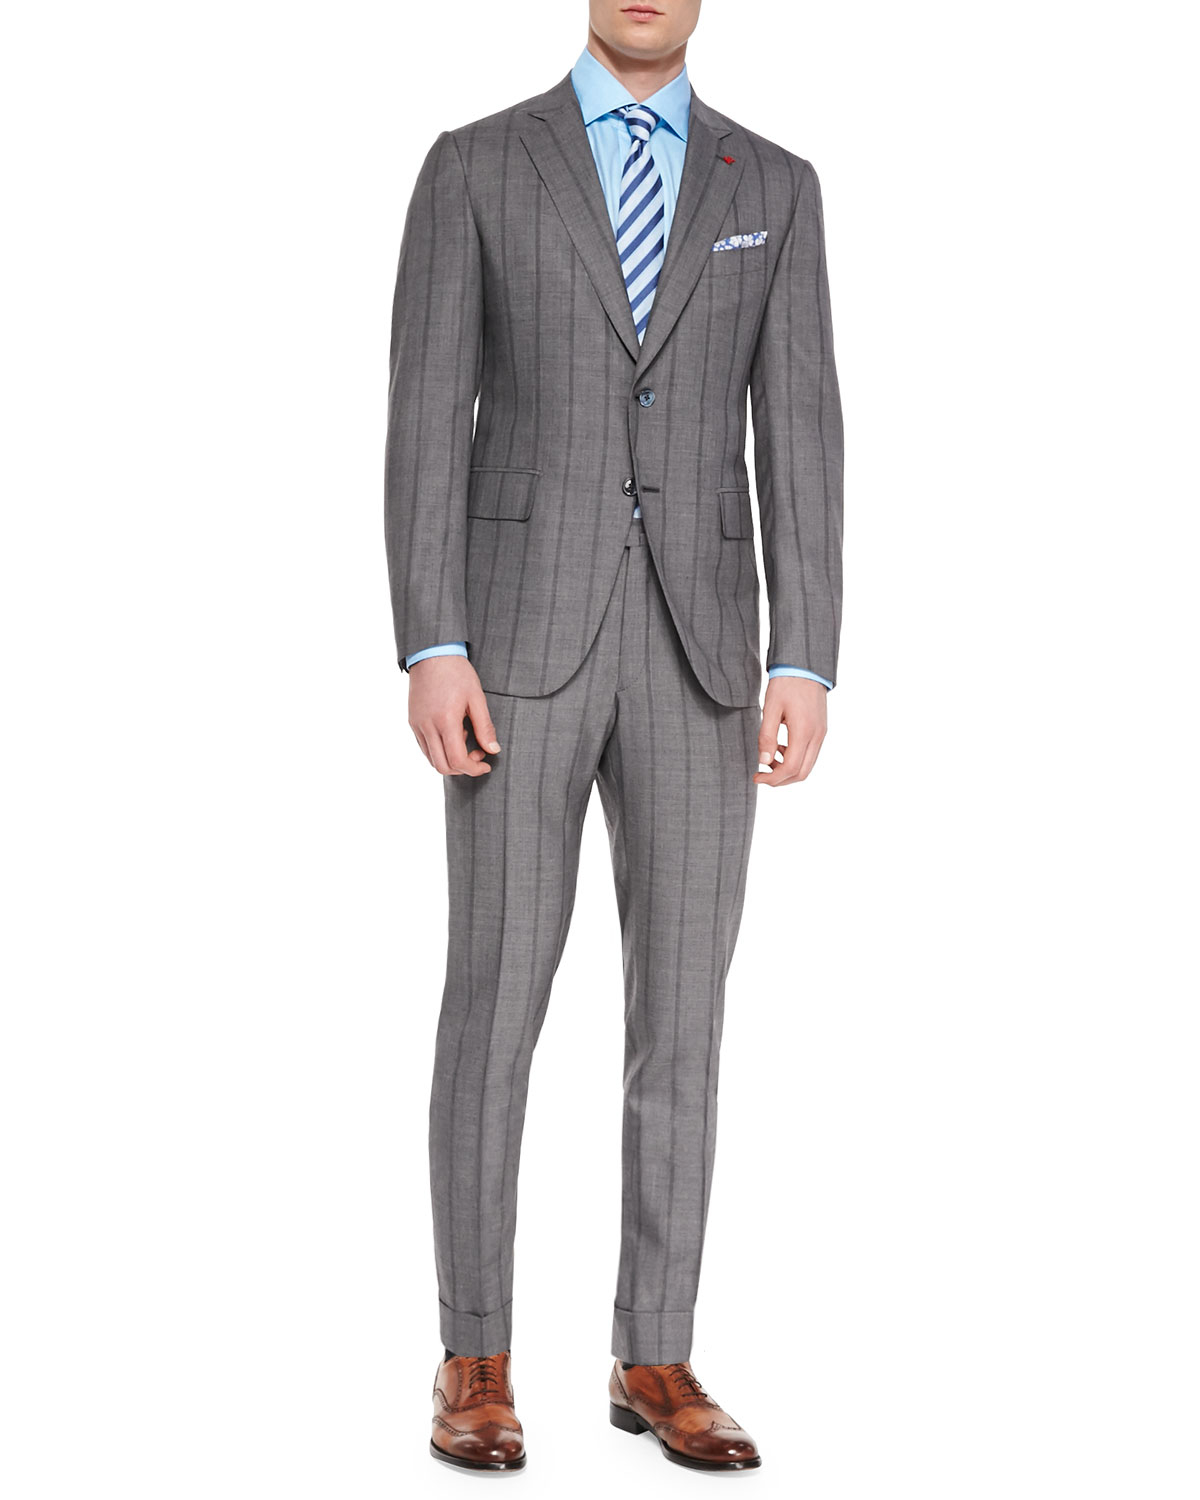 Lyst - Isaia Shadow Stripe Two-piece Suit in Gray for Men